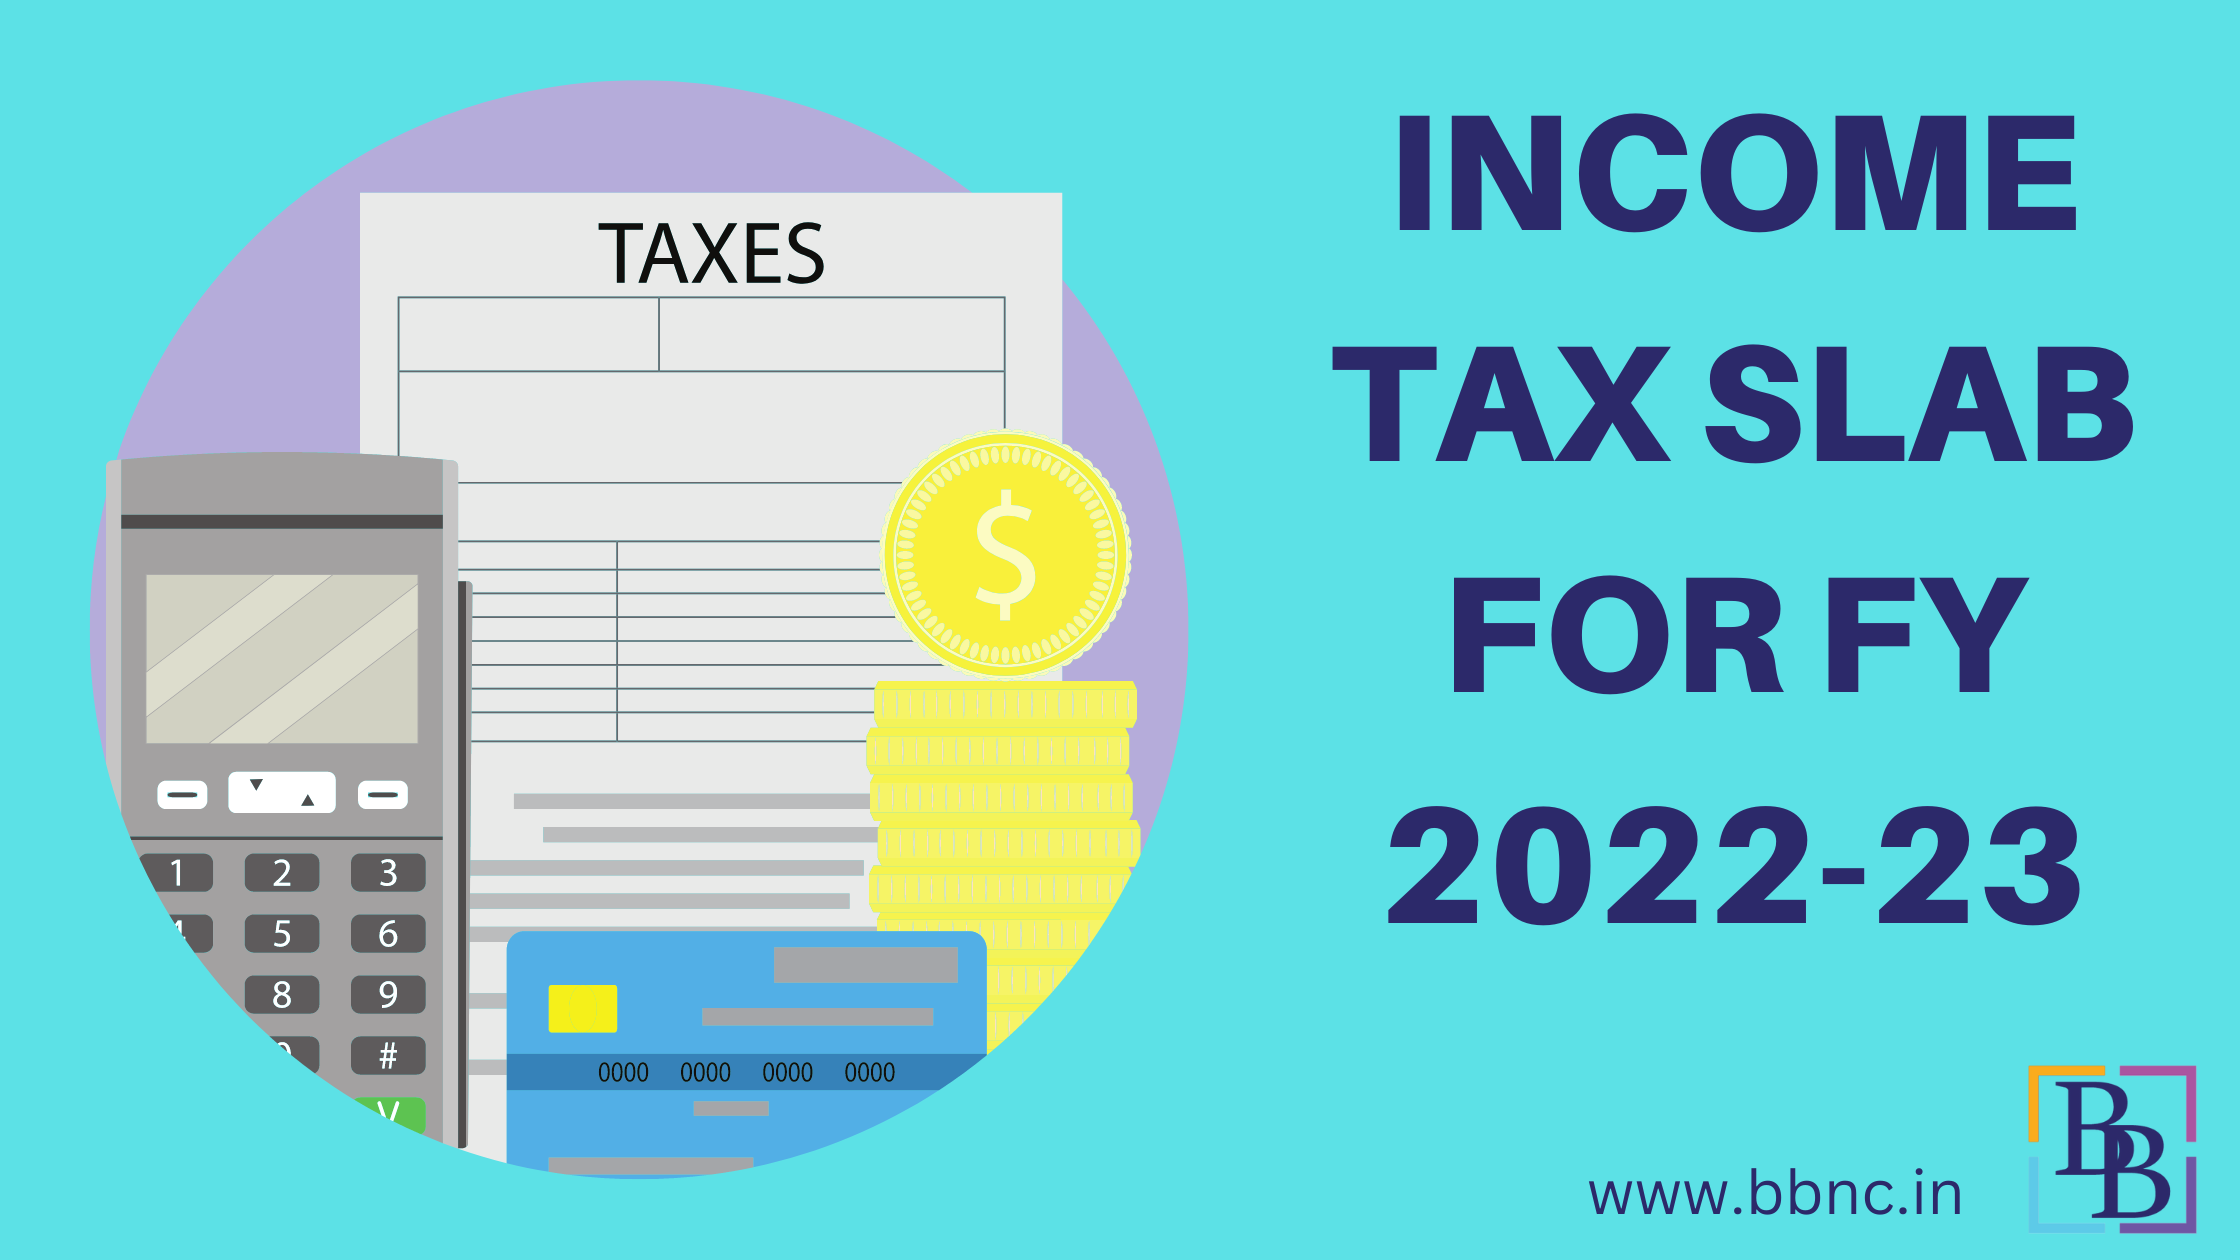 income-tax-slab-for-fy-2022-23-bbnc